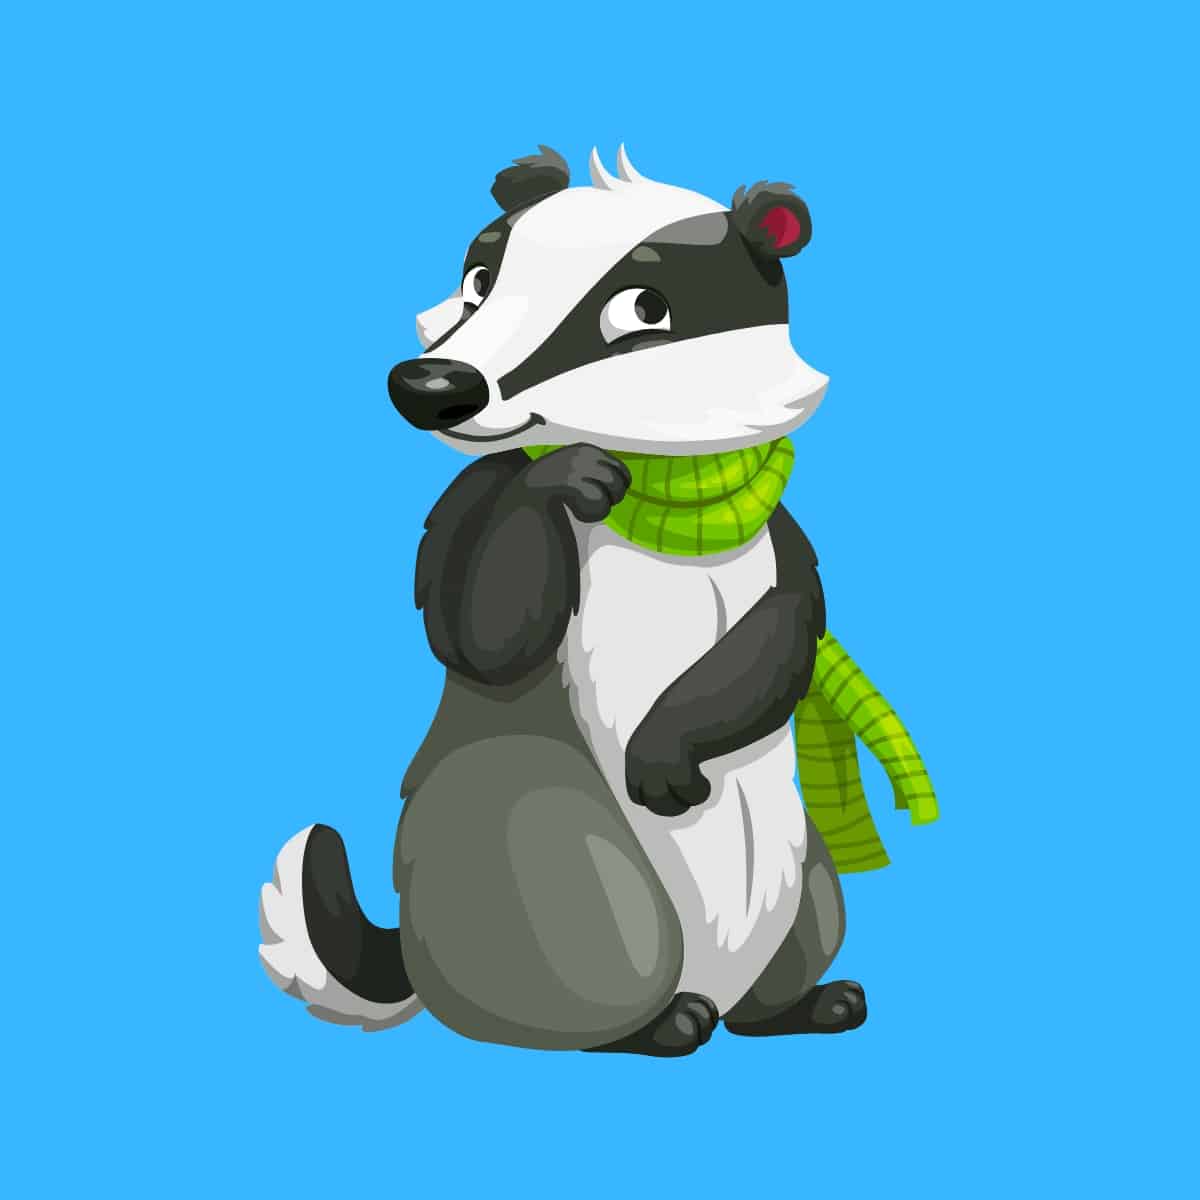 Cartoon graphic of a badger wearing a green scarf on a blue background.